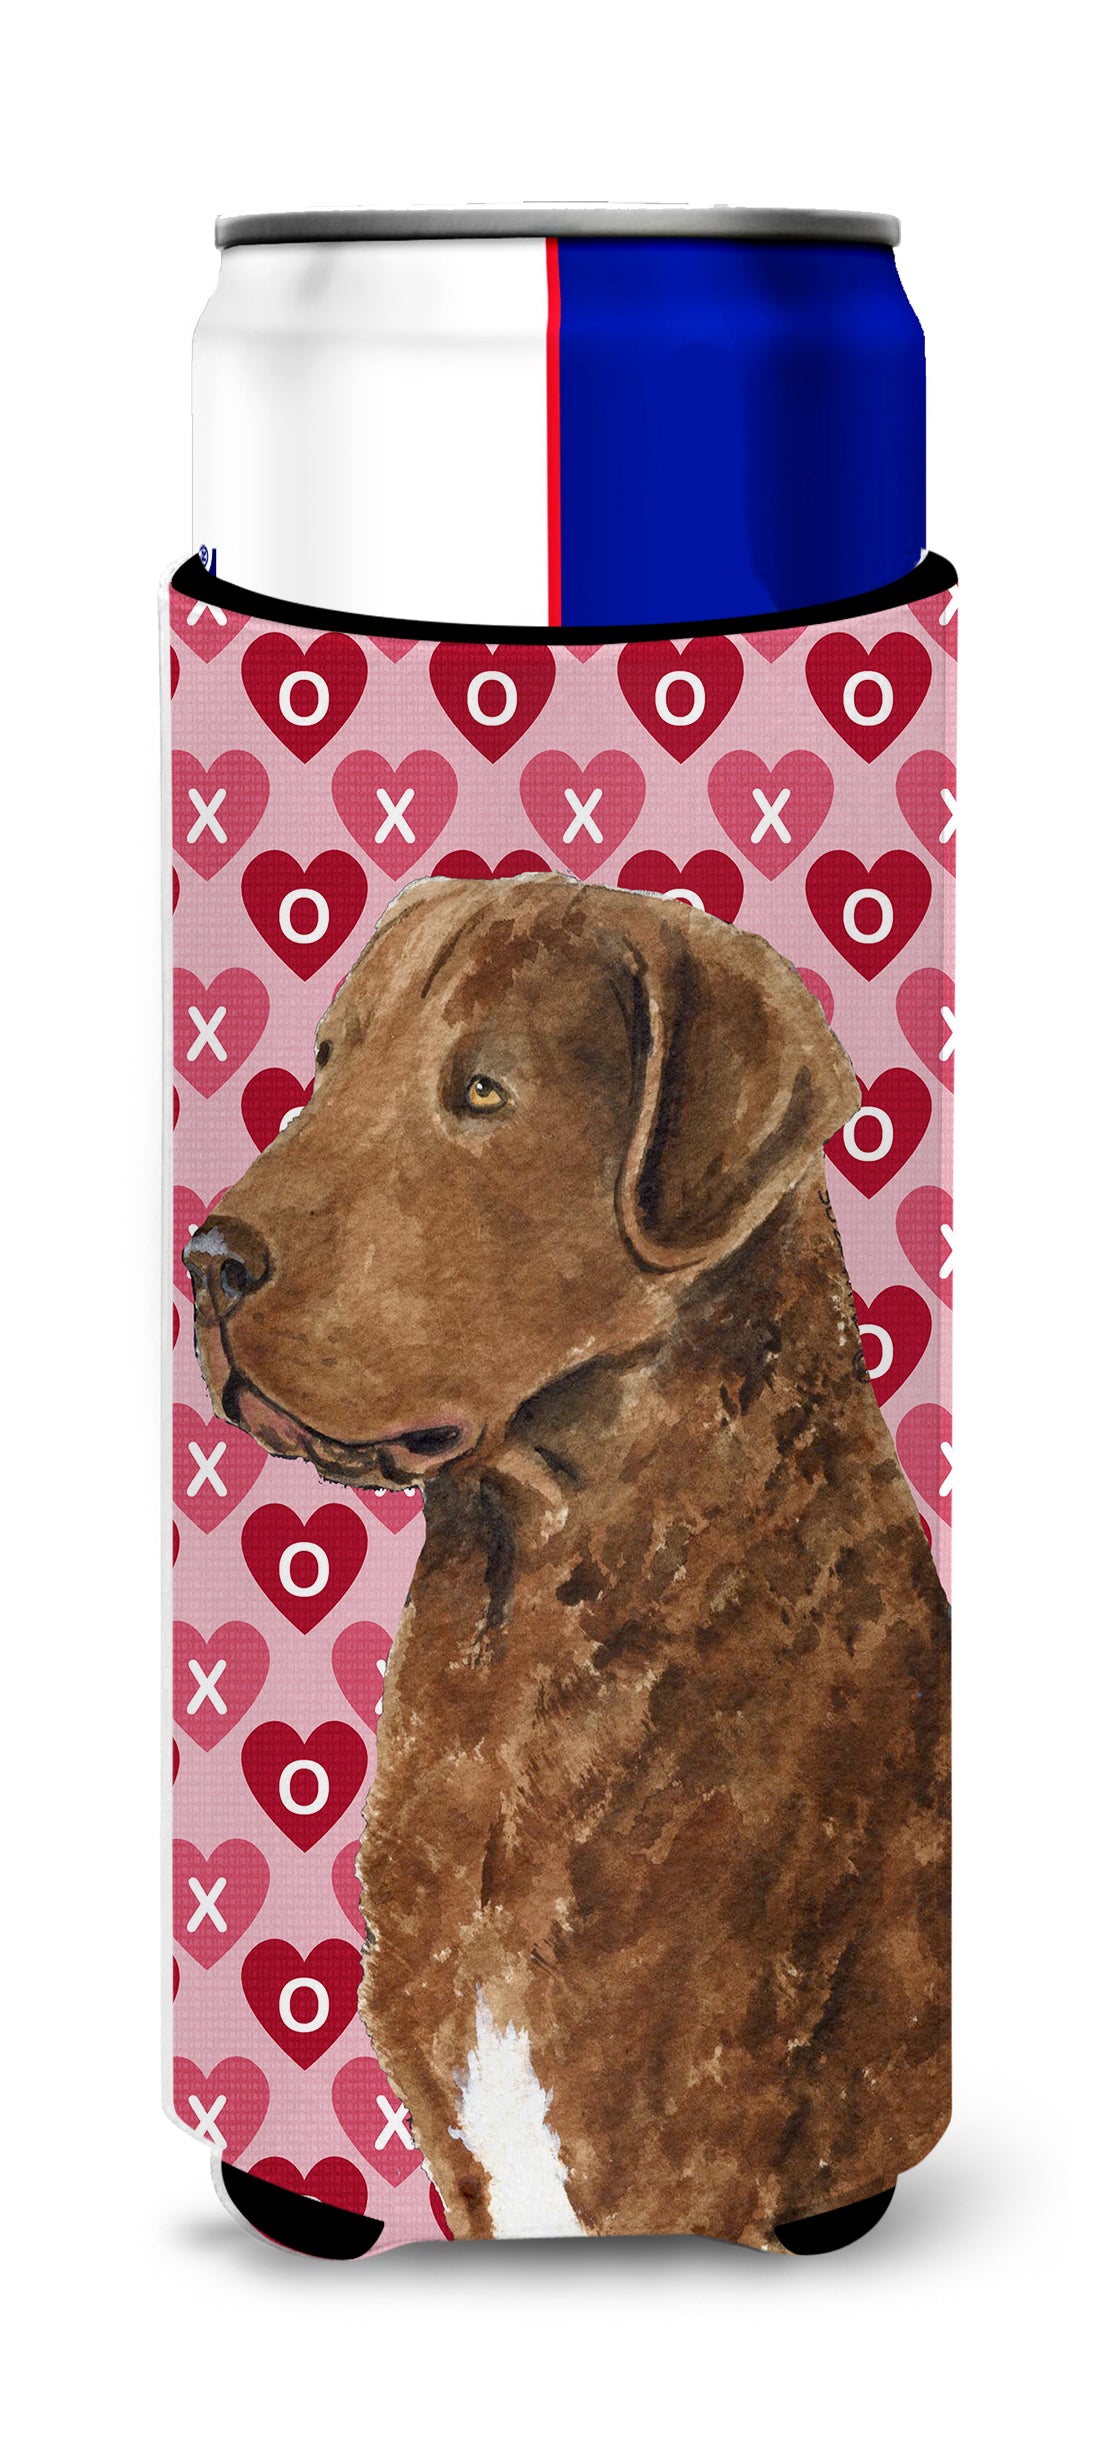 Chesapeake Bay Retriever Hearts Love and Valentine's Day Ultra Beverage Insulators for slim cans SS4531MUK.